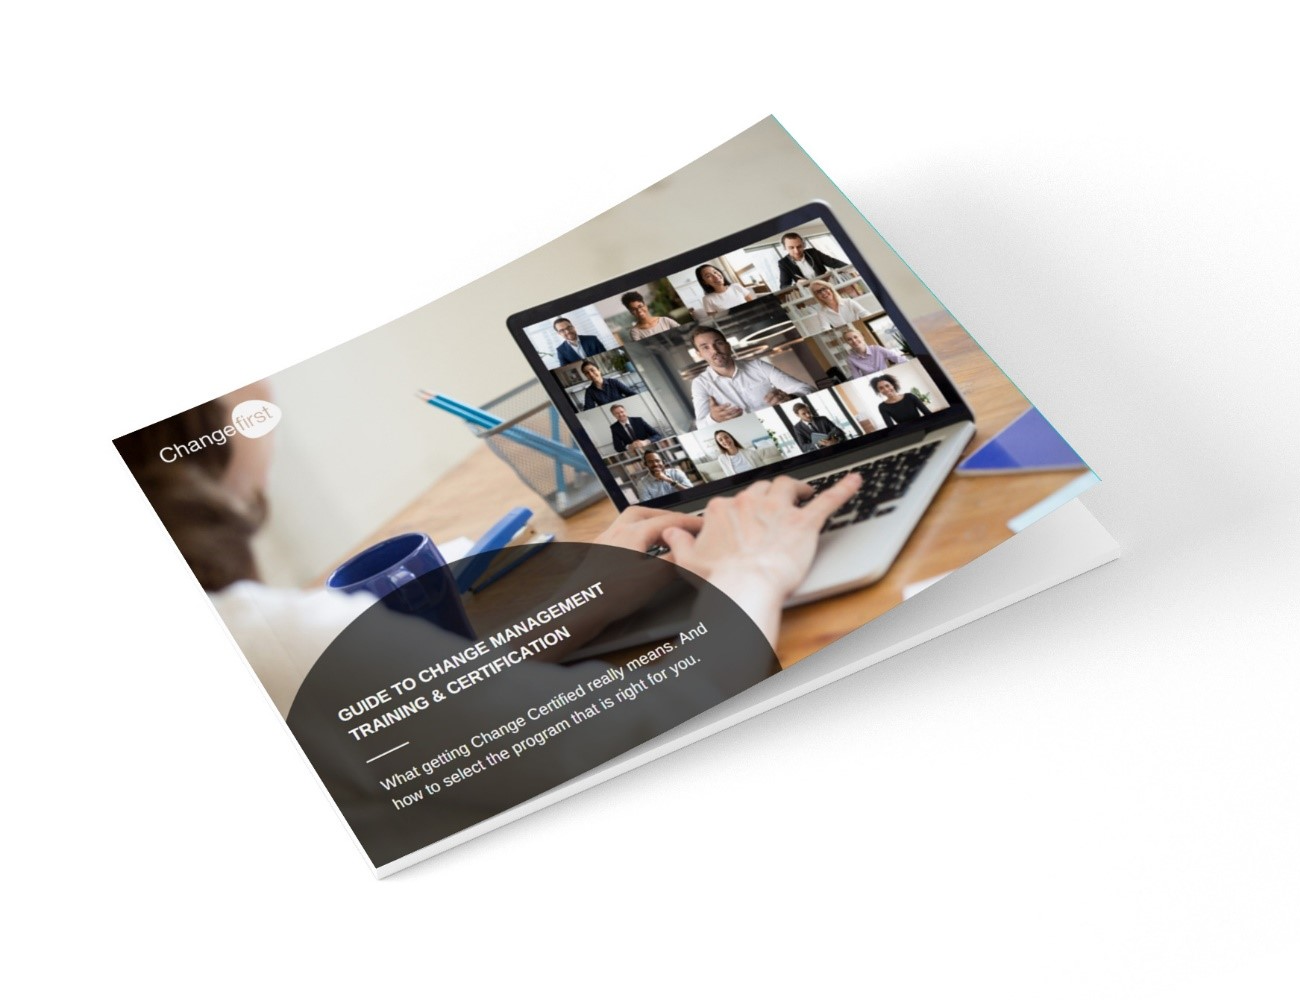 (eBook) Download our comprehensive guide to Change Management Training & Certification